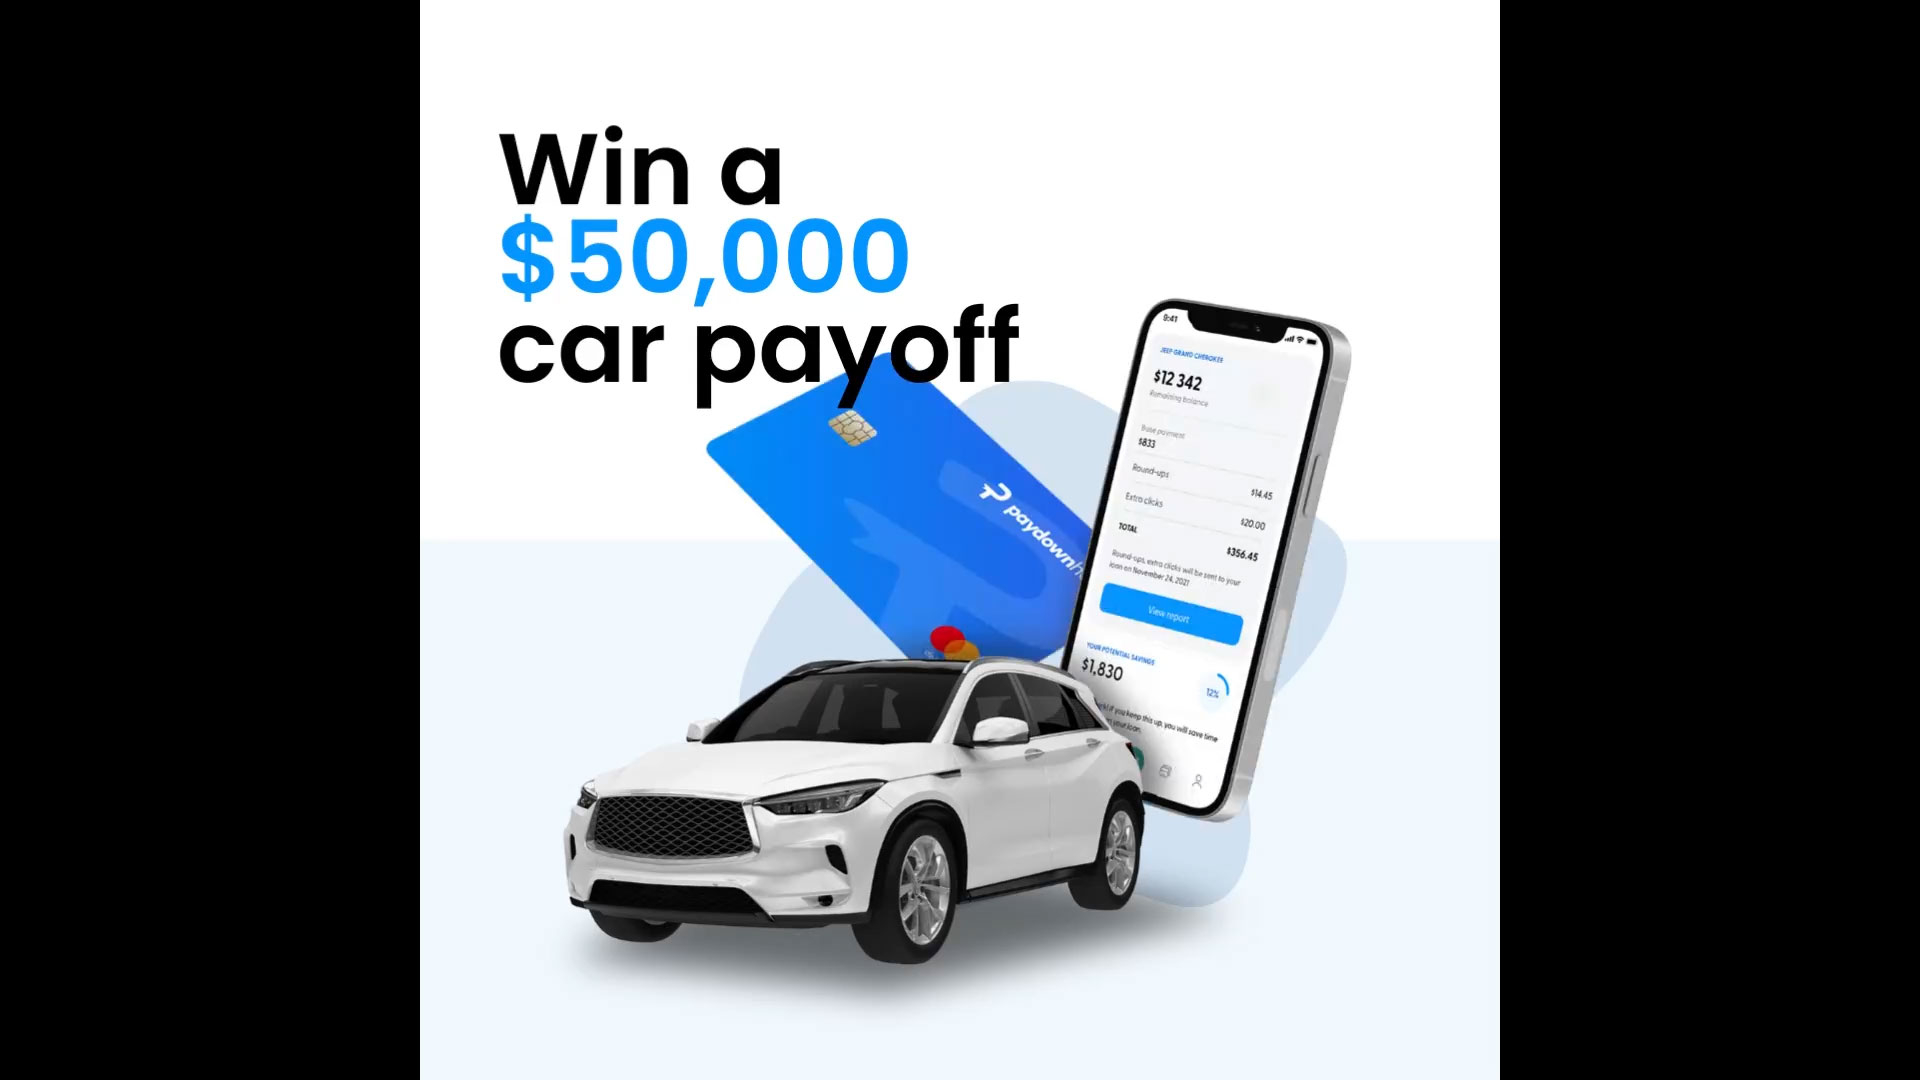 Startup, Paydownhero is on a mission to battle auto debt. The car-loving company will help kickstart a debt-free journey for one new customer and help pay off their car loan - Up to $50,000